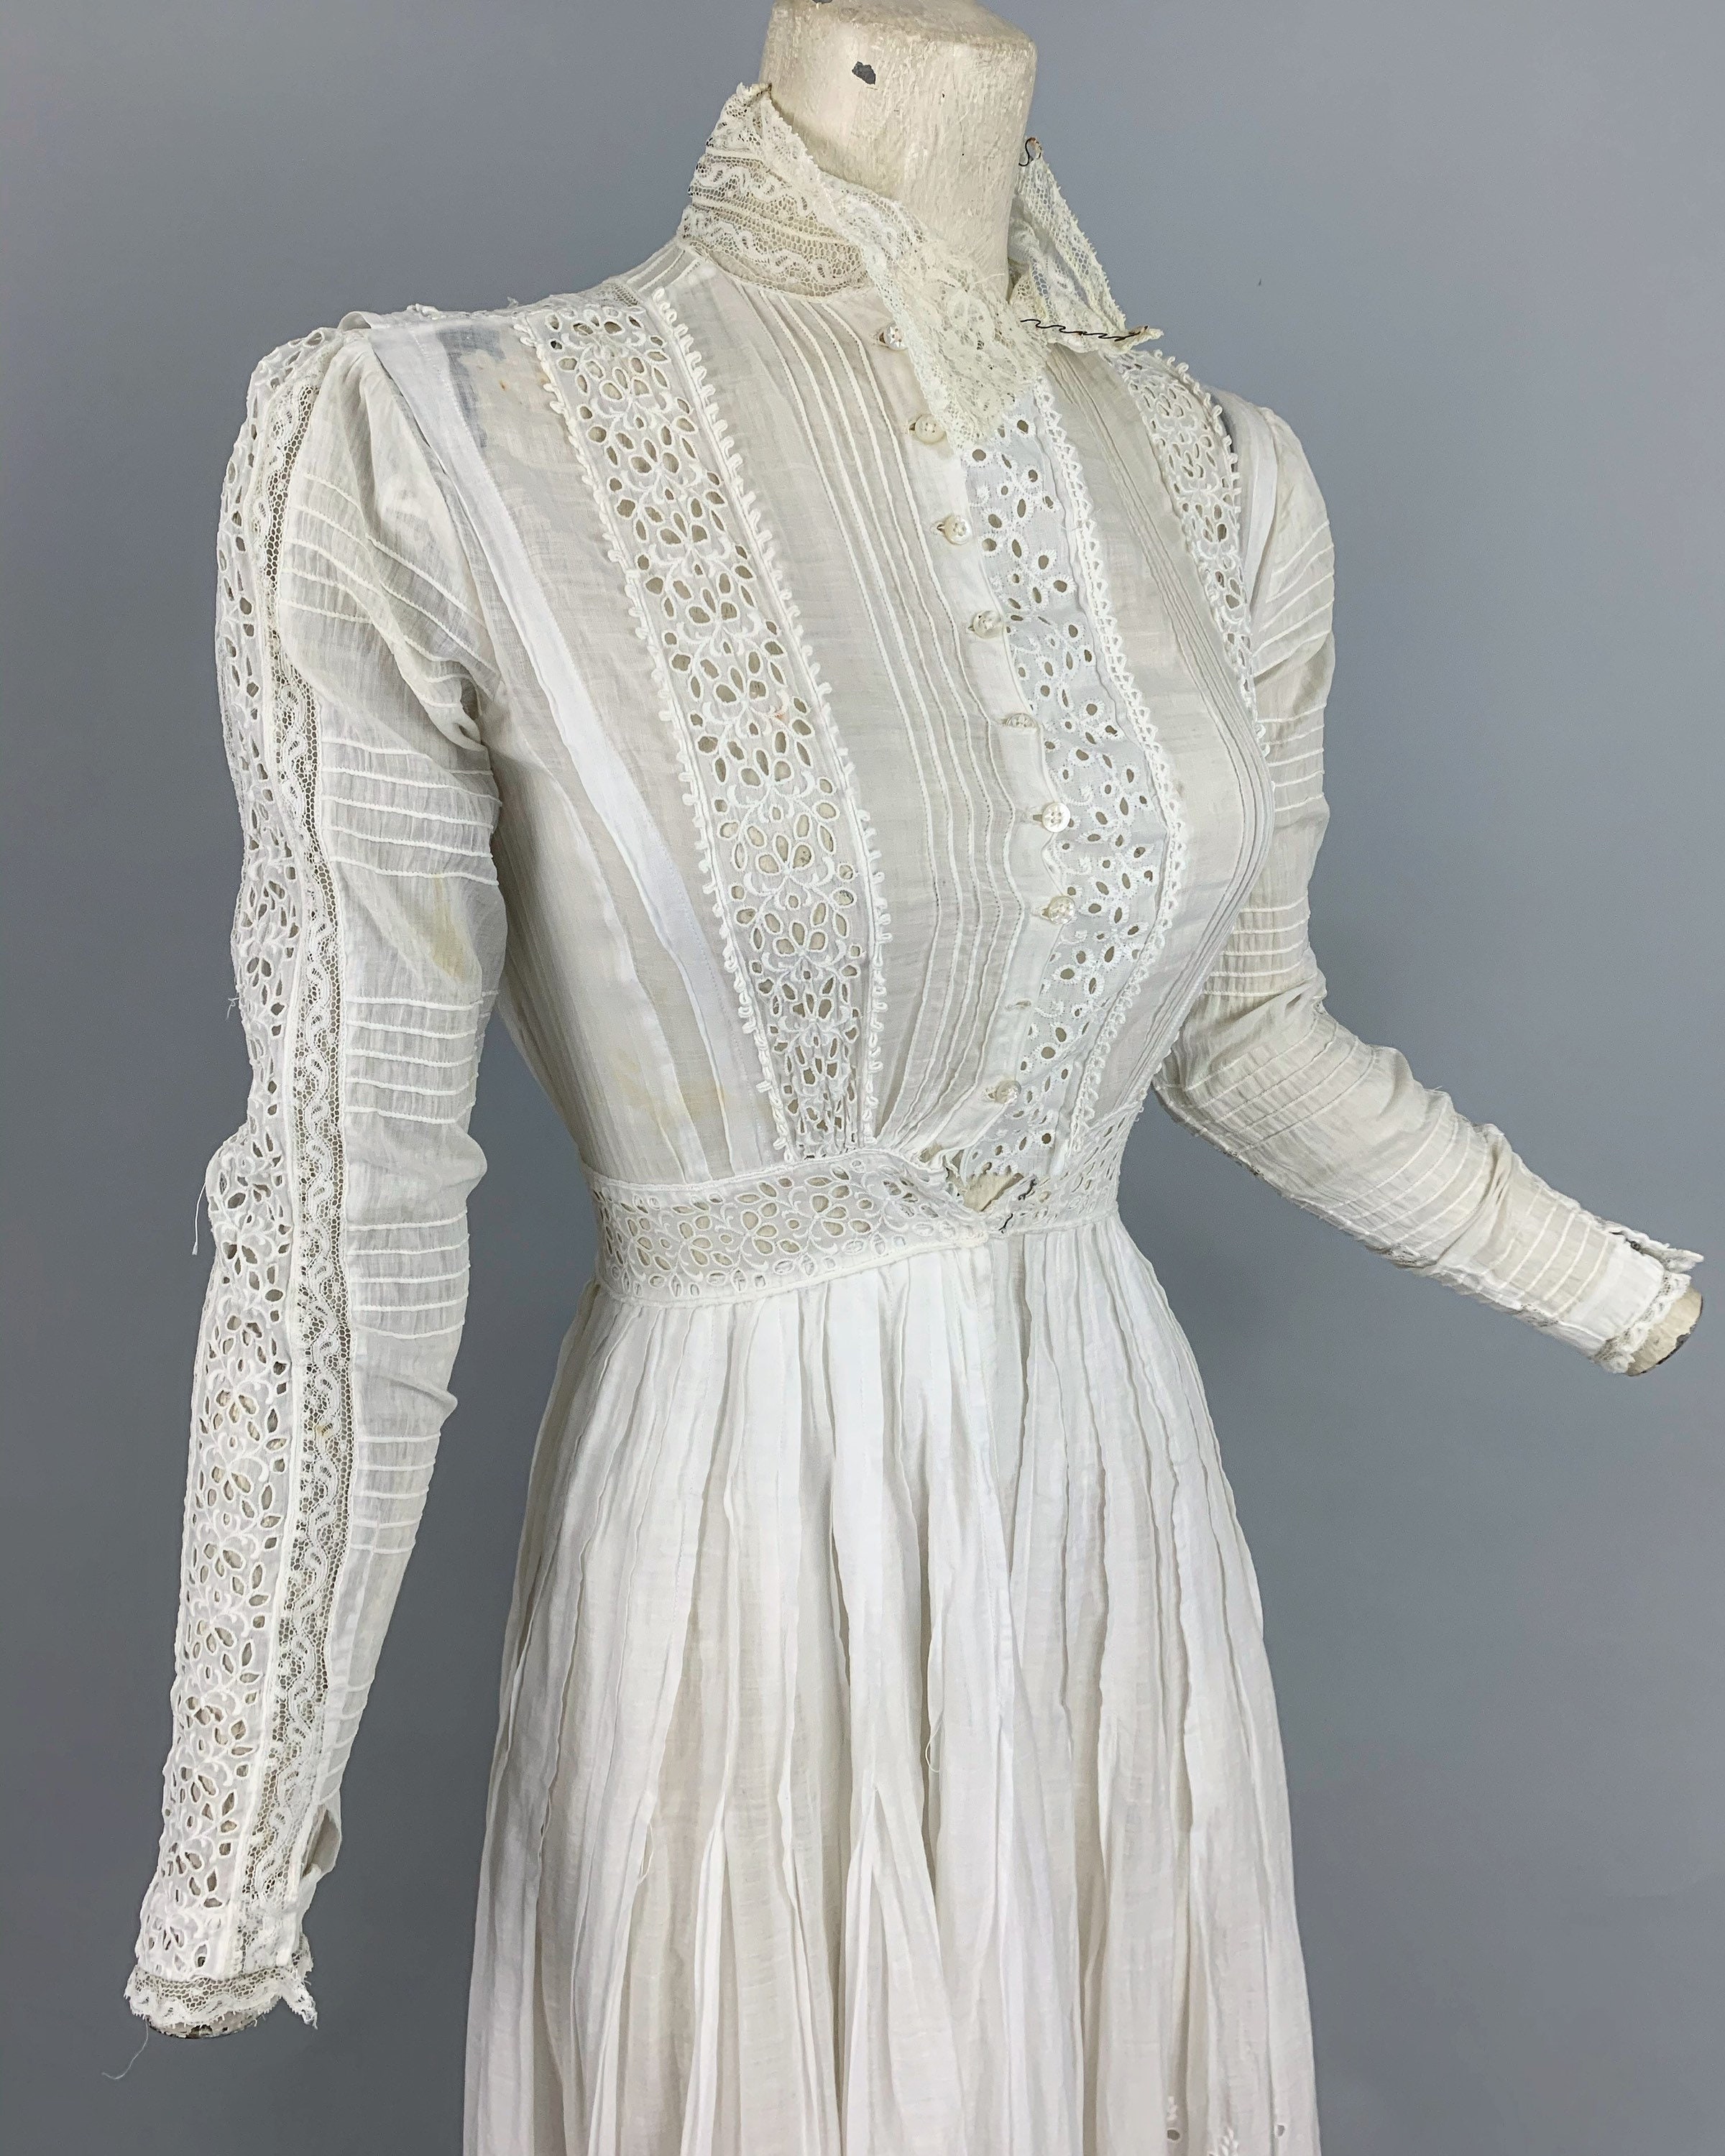 Tea Gowns | Fashion and Decor: A Cultural History